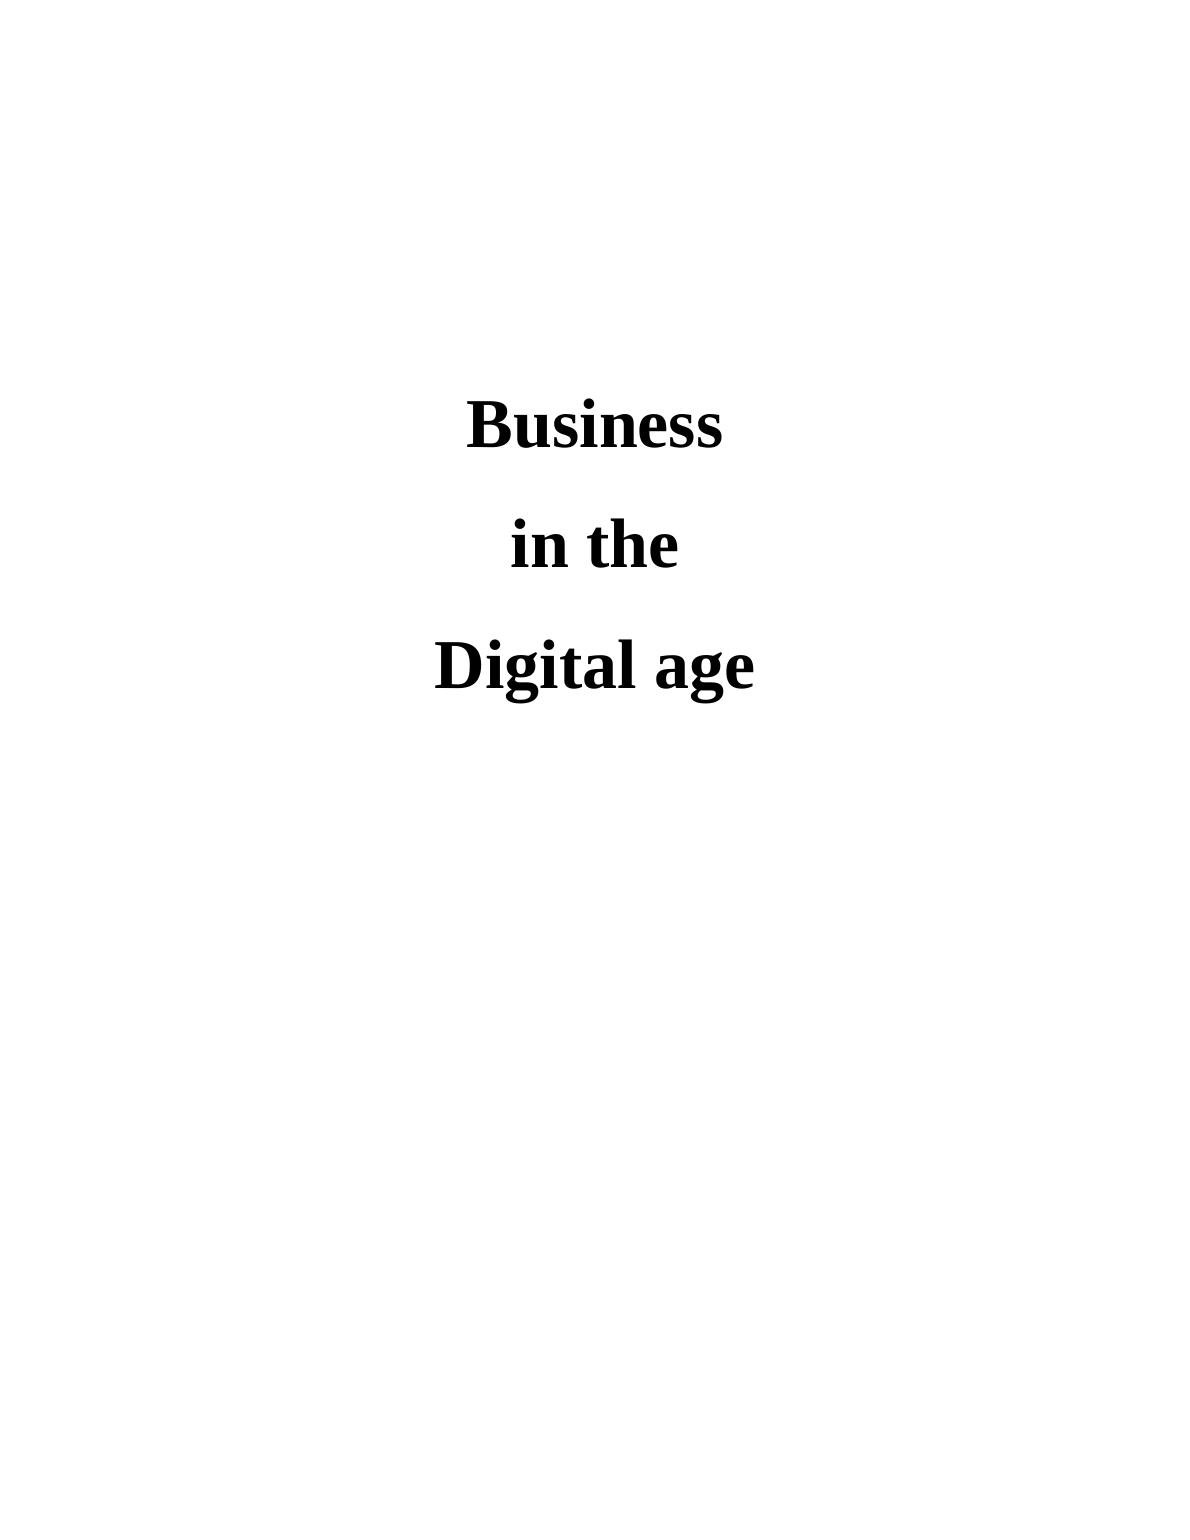 Business in The Digital Age - PDF_2